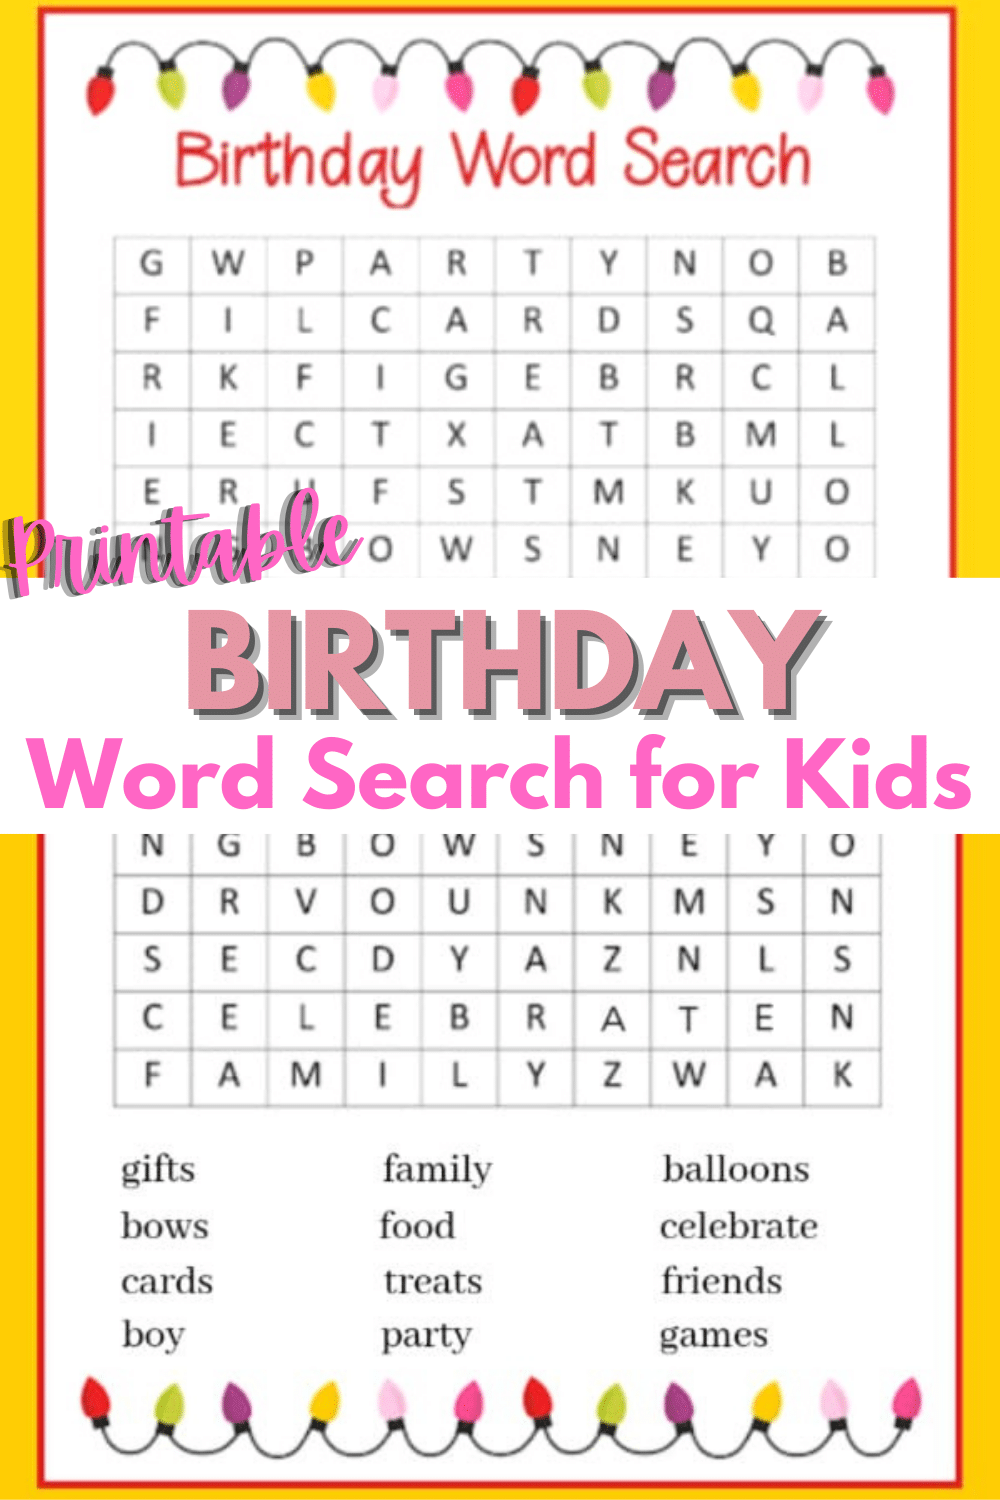 A printable birthday word search is a great activity for a children's birthday party. This word search is perfect for boys or girls and has primary colors. #birthday #birthdayactivities #wordsearch via @wondermomwannab